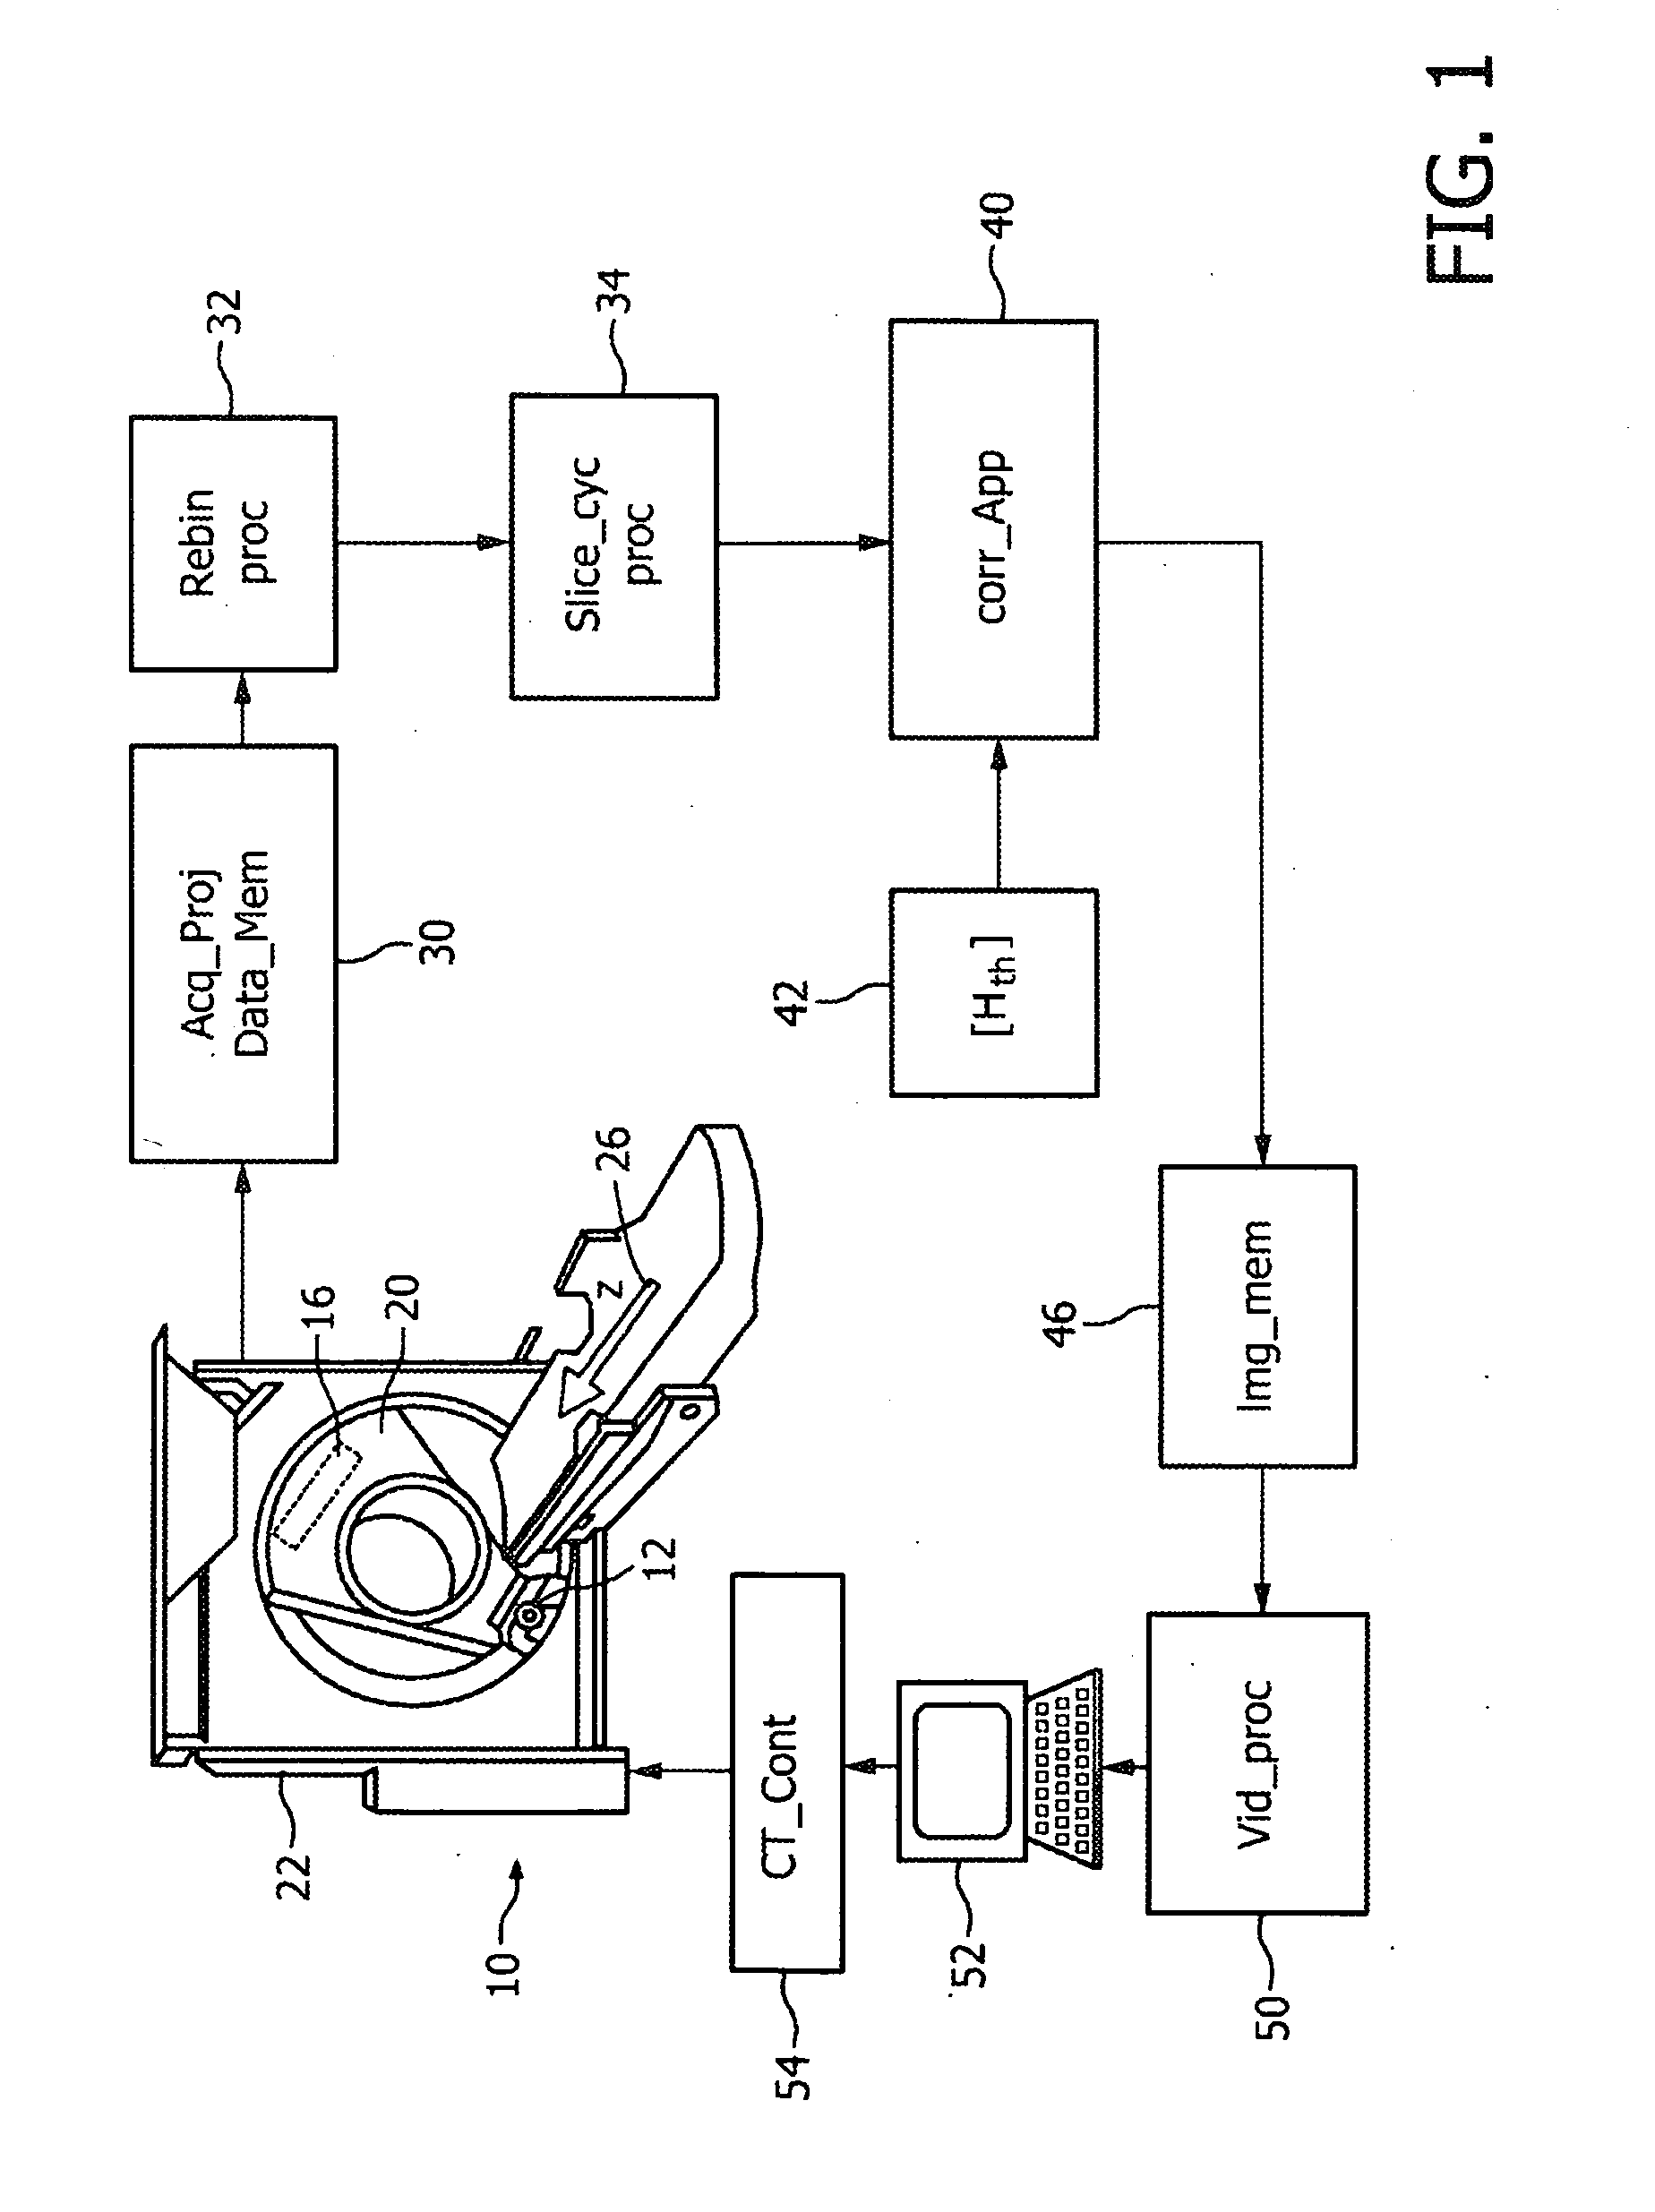 Apparatus, method and computer program for producing a corrected image of a region of interest from acquired projection data